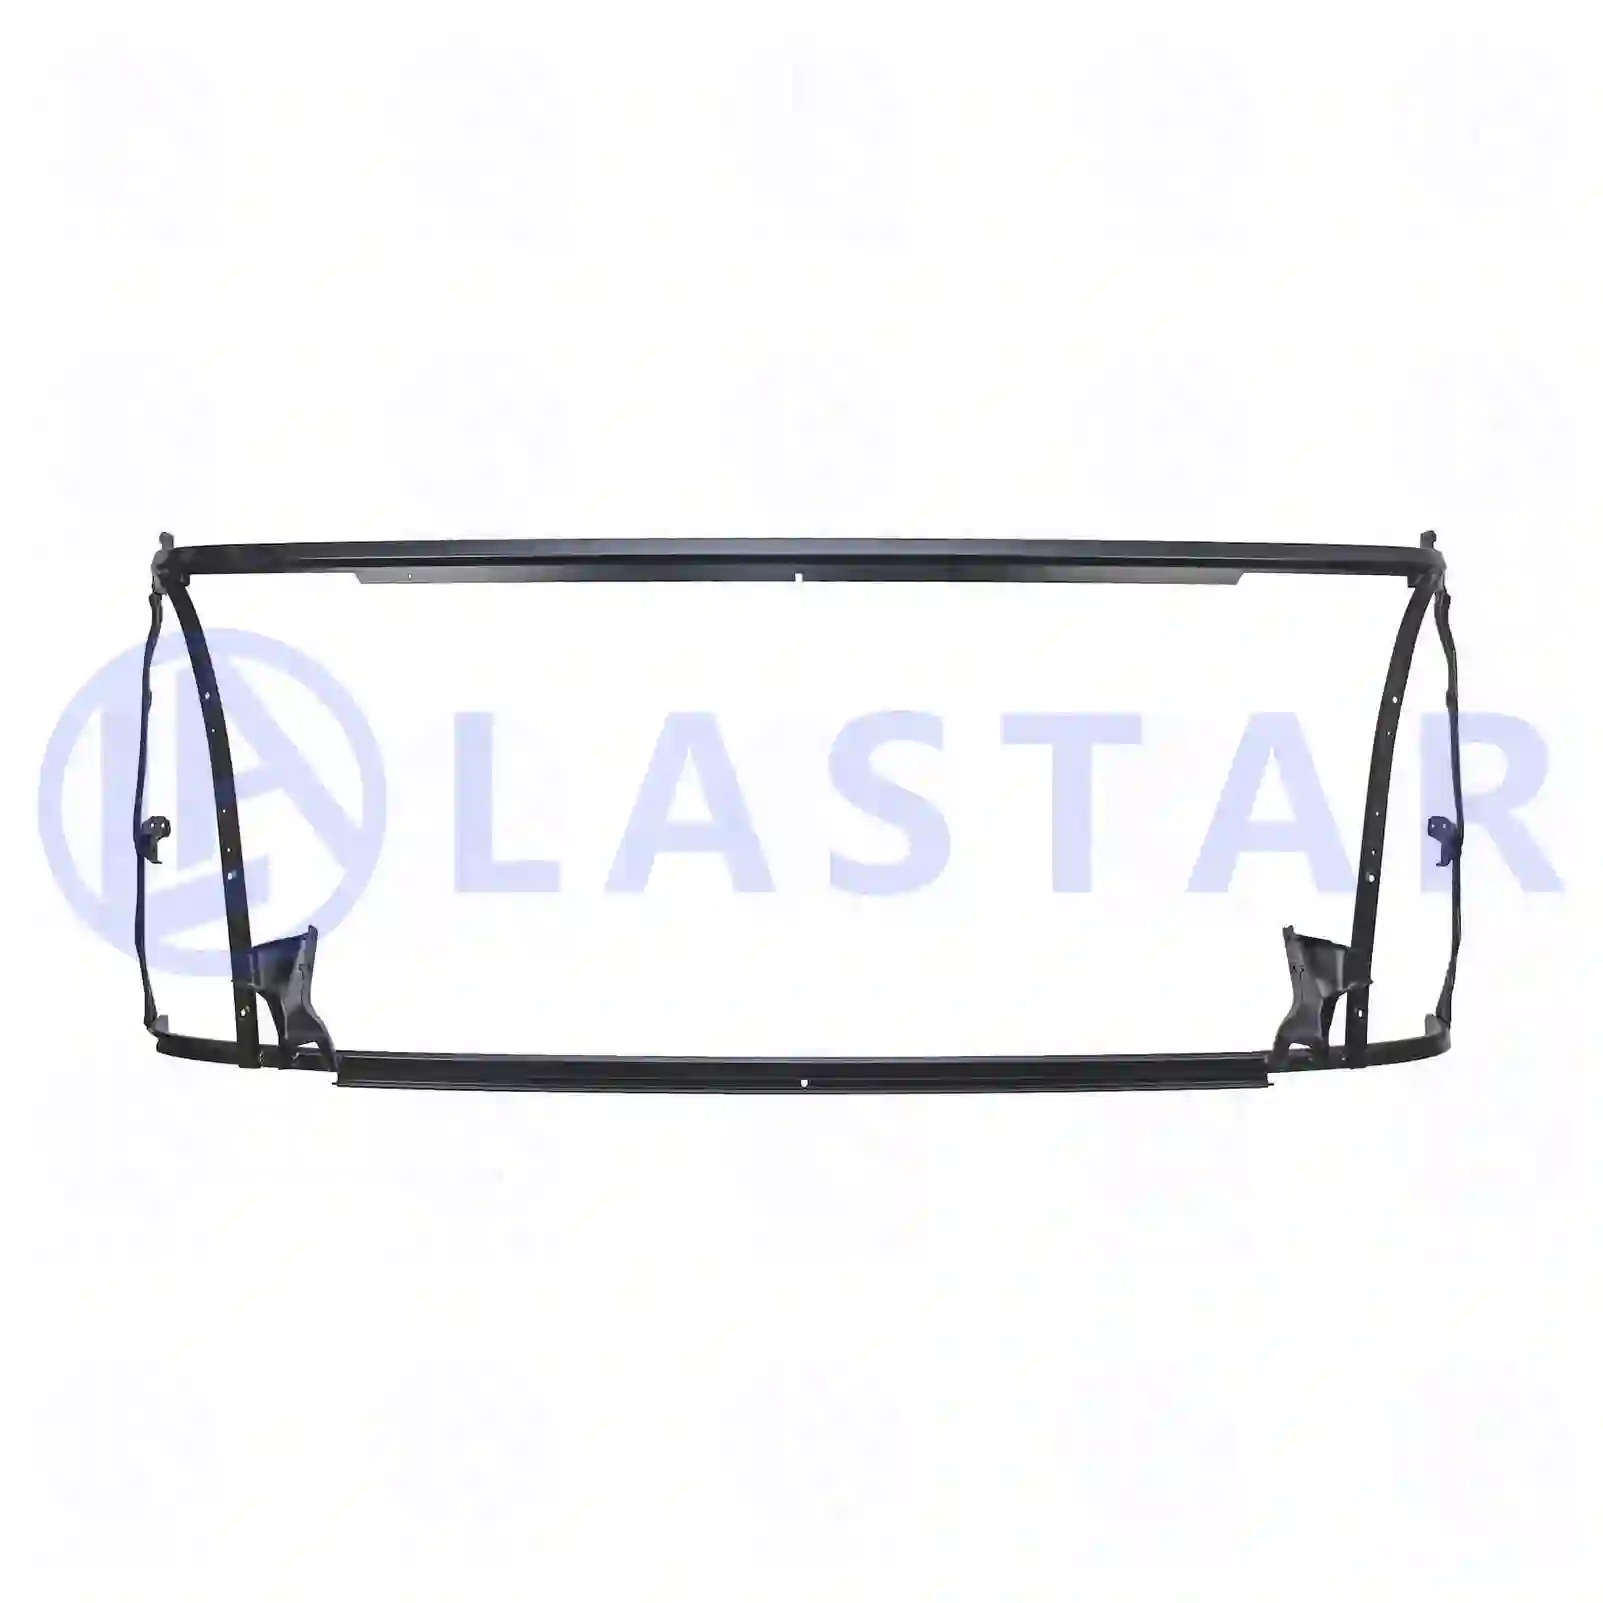 Frame, front flap, 77721641, 1451246, 1721731, 1746585 ||  77721641 Lastar Spare Part | Truck Spare Parts, Auotomotive Spare Parts Frame, front flap, 77721641, 1451246, 1721731, 1746585 ||  77721641 Lastar Spare Part | Truck Spare Parts, Auotomotive Spare Parts